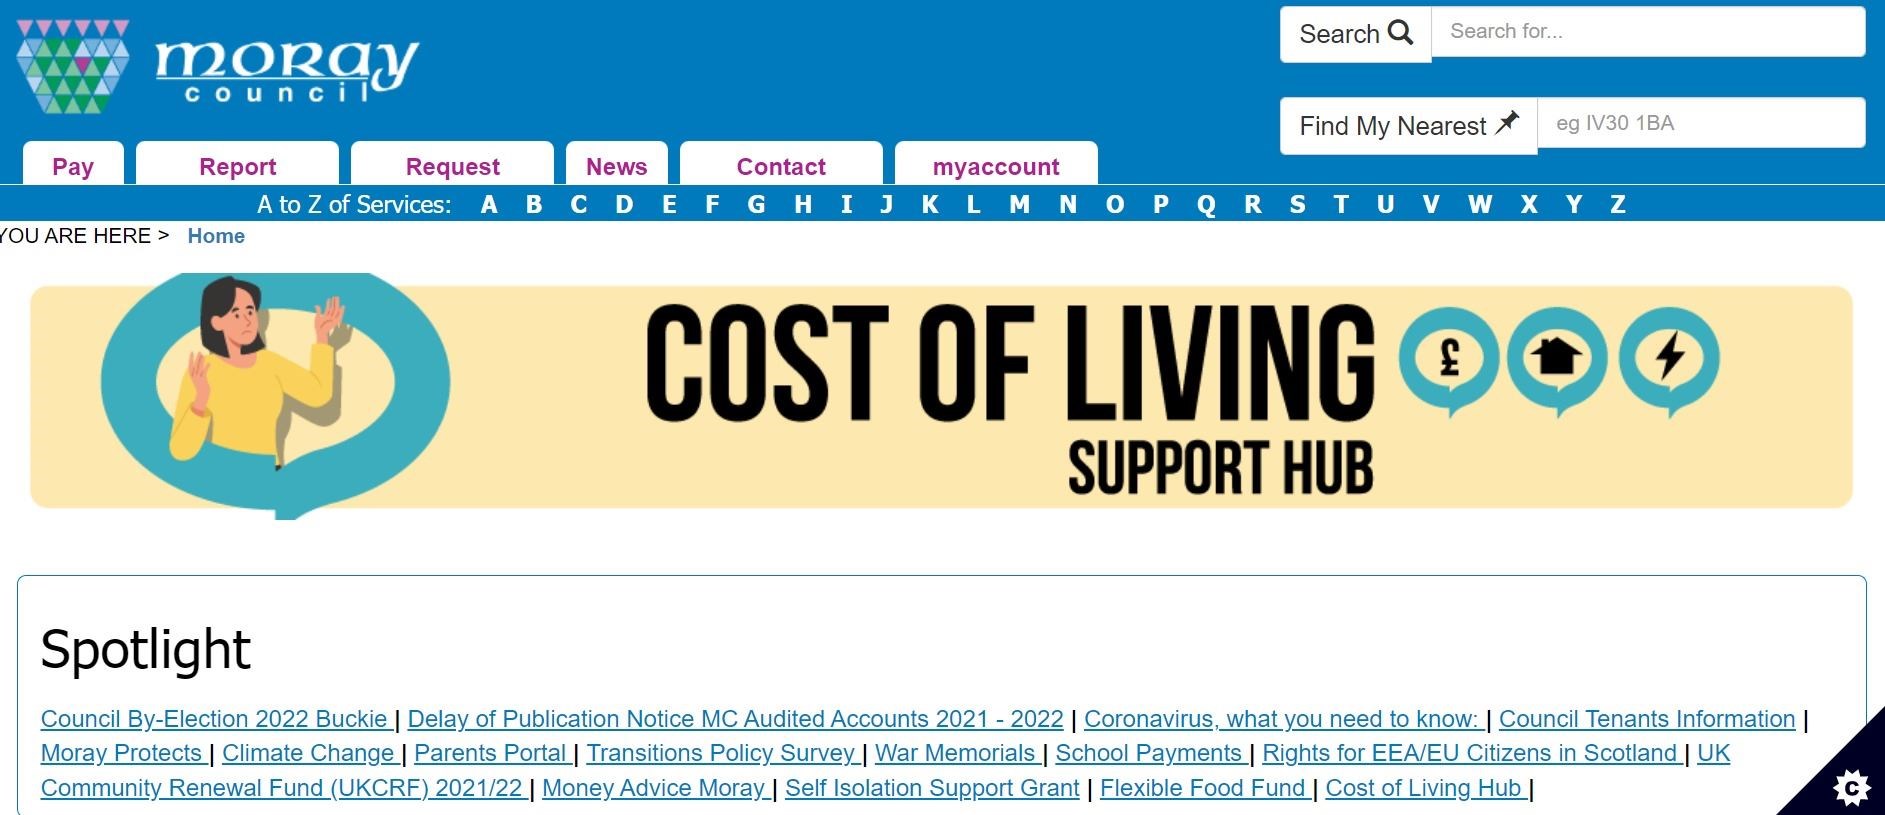 Moray Council's cost of living hub brings together resources to ease the cost of living crisis.